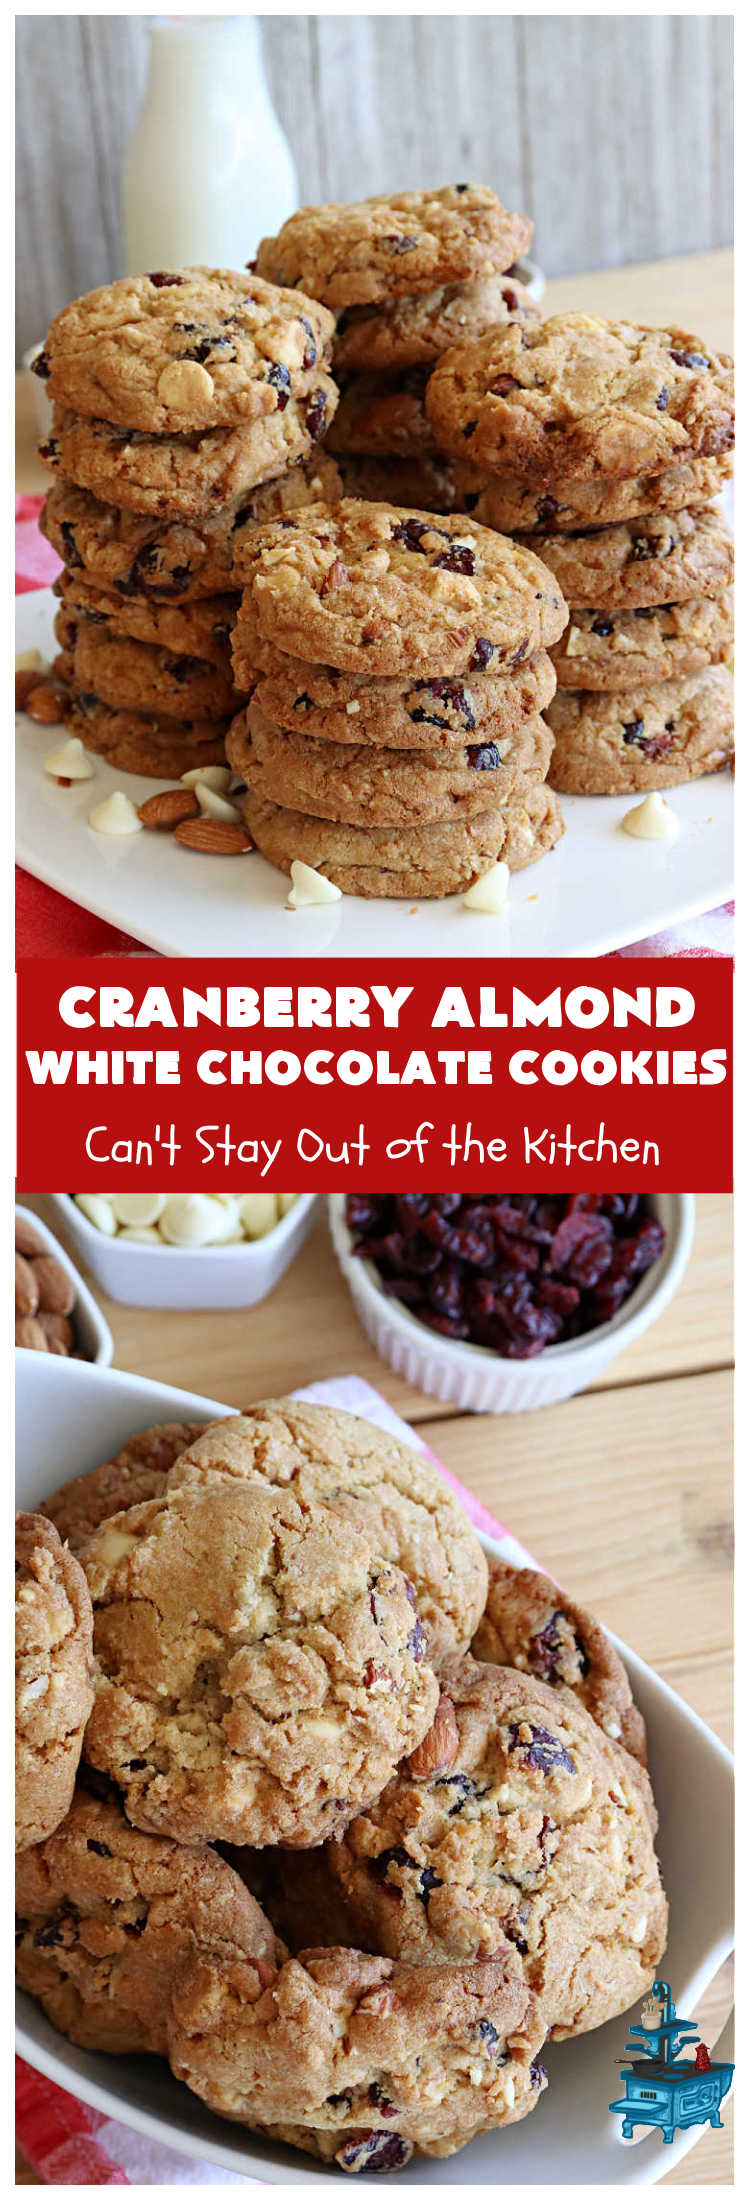 Cranberry Almond White Chocolate Cookies | Can't Stay Out of the Kitchen | these delectable #cookies start from a   favorite #ChocolateChipCookie #recipe but use #WhiteChocolateChips, #almonds & dried #cranberries. They're perfect for #holiday parties, potlucks, #tailgating & entertaining of any kind. #chocolate #WhiteChocolate #craisins #dessert #CranberryDessert #ChocolateDessert #AlmondDessert #HolidayDessert #ChristmasCookieExchange #CranberryAlmondWhiteChocolateCookies